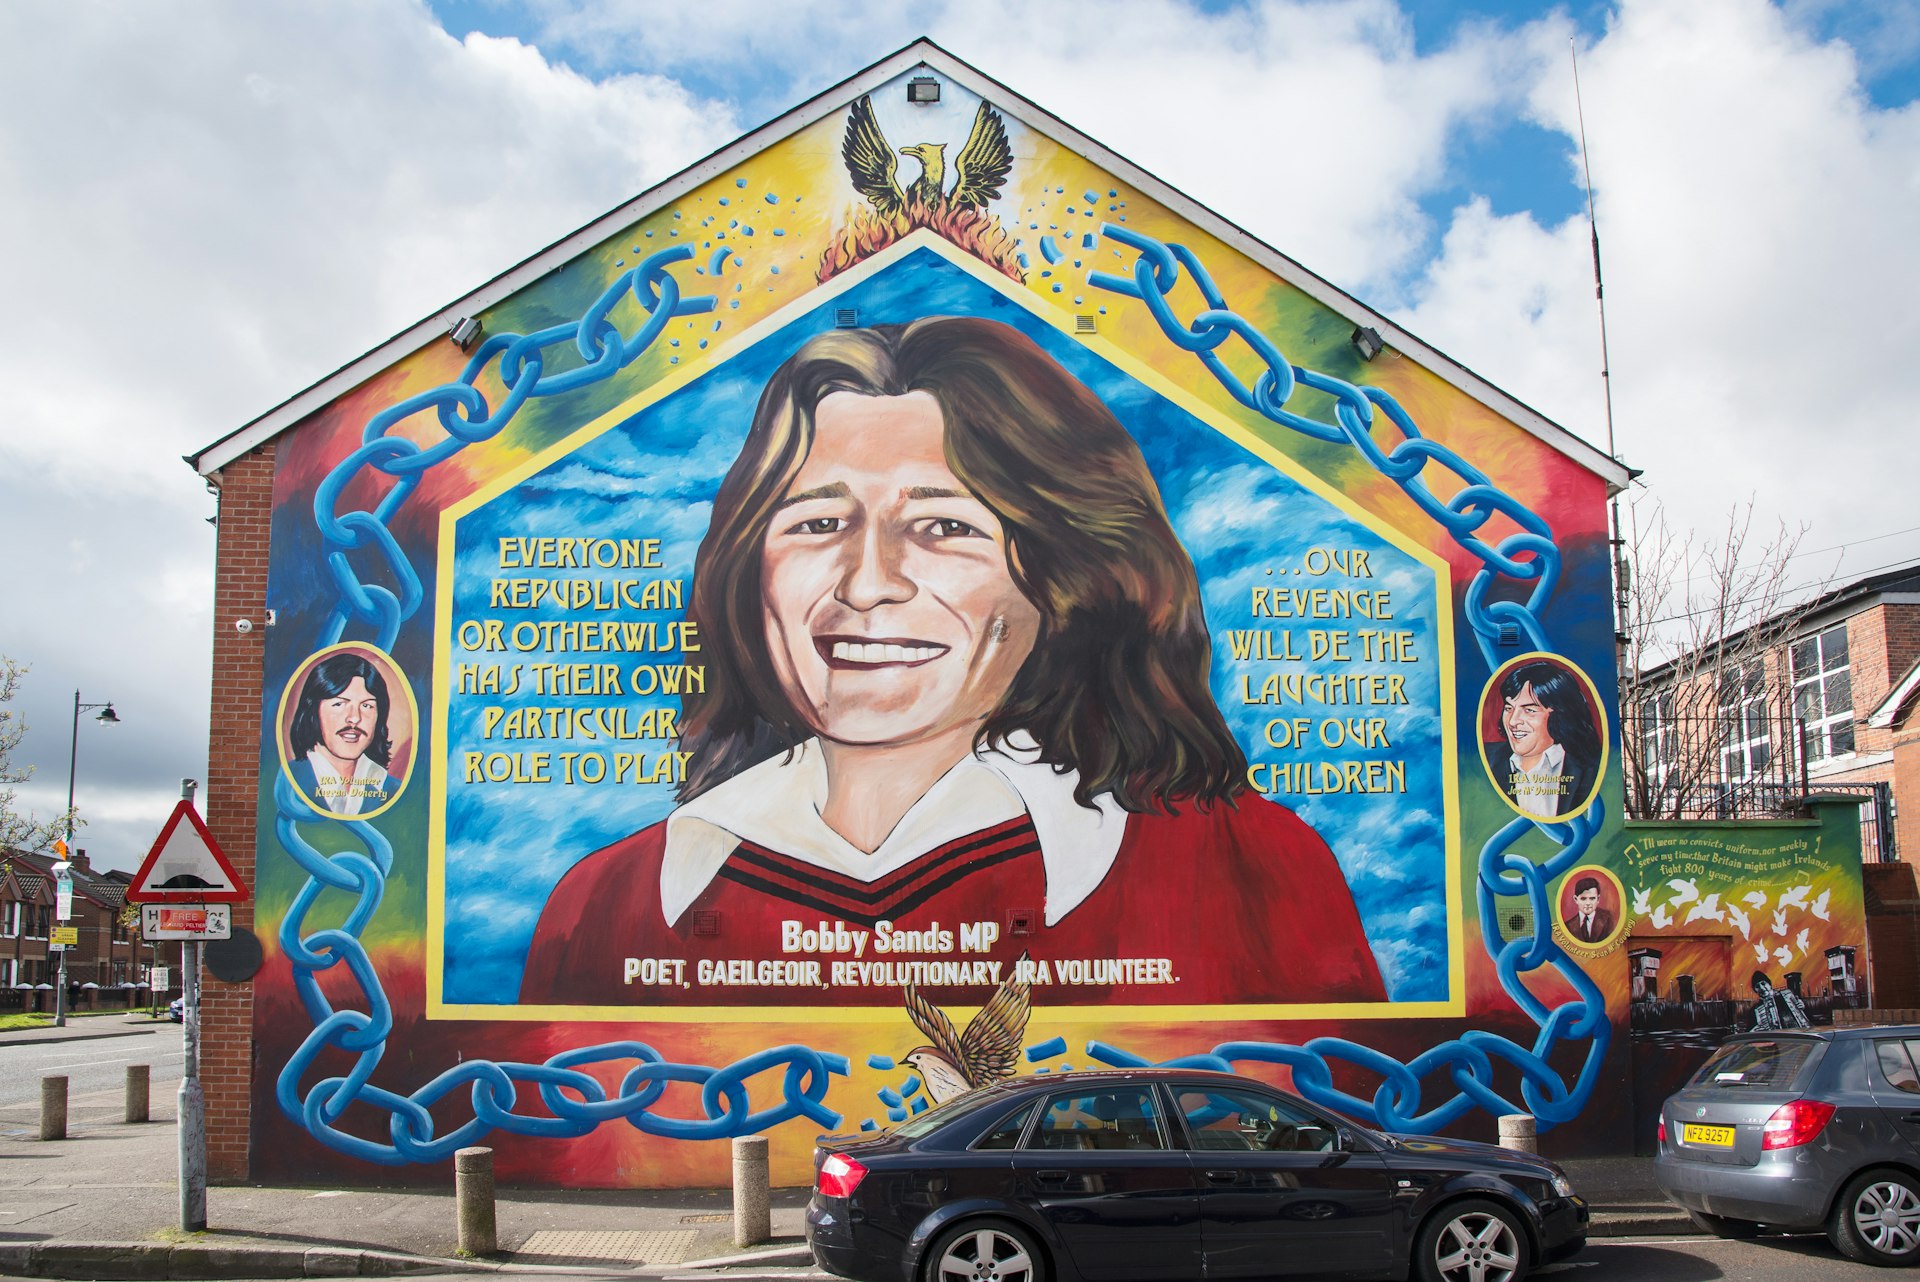 Republican Mural featuring Bobby Sands on the Falls Road, Belfast